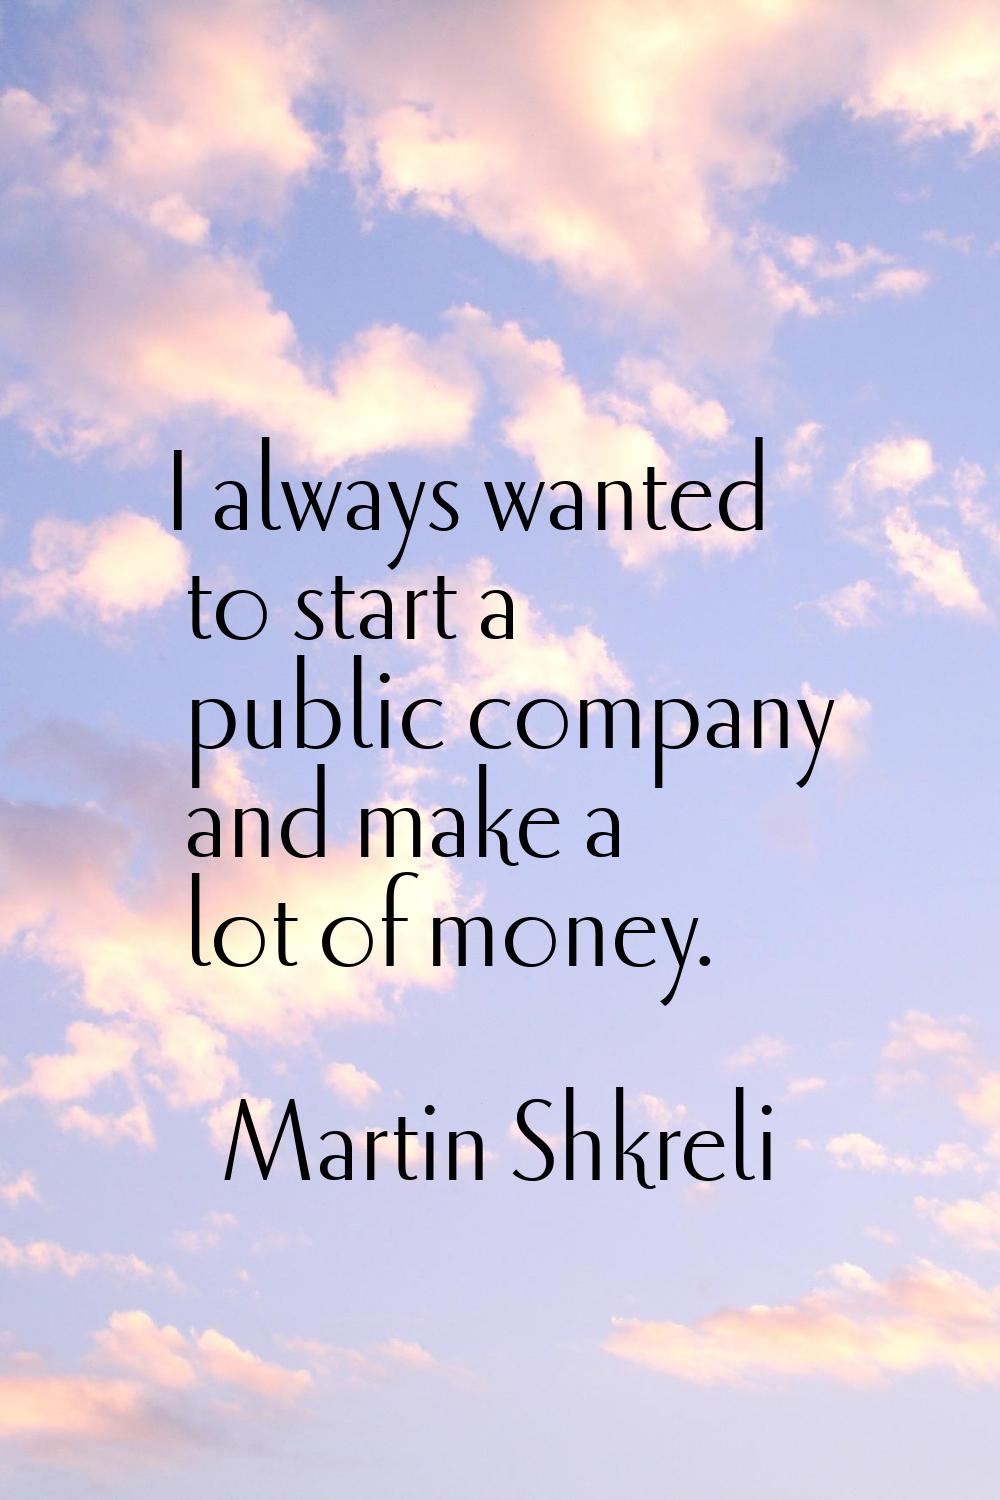 I always wanted to start a public company and make a lot of money.